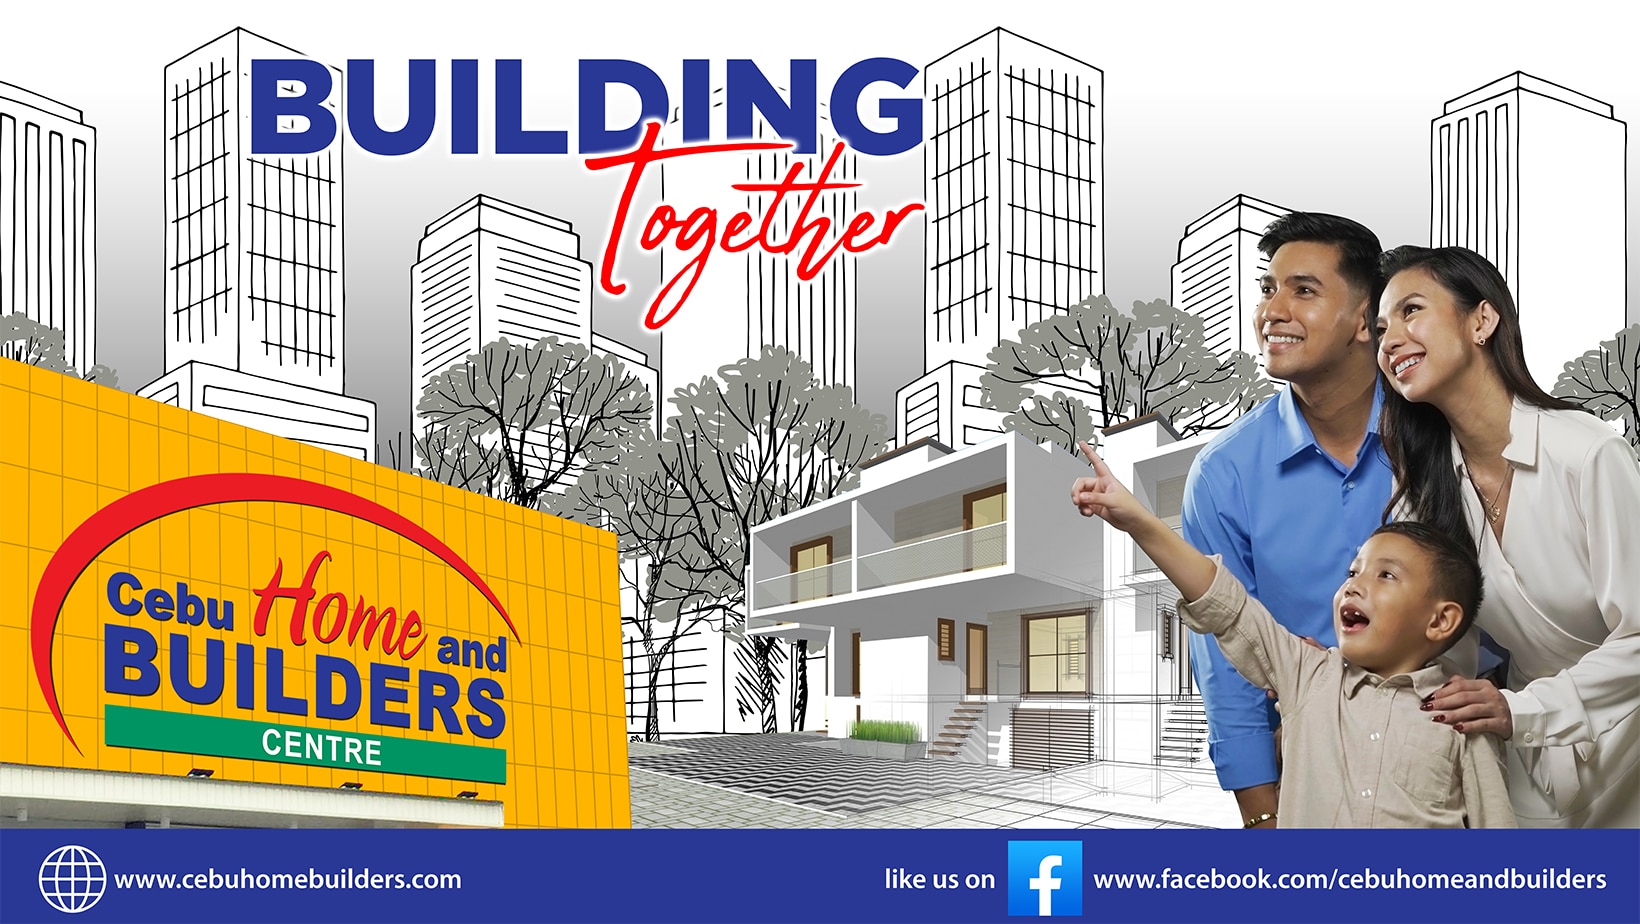 Cebu Home and Builders Centre Strikes a Chord of Unity with Debut Jingle